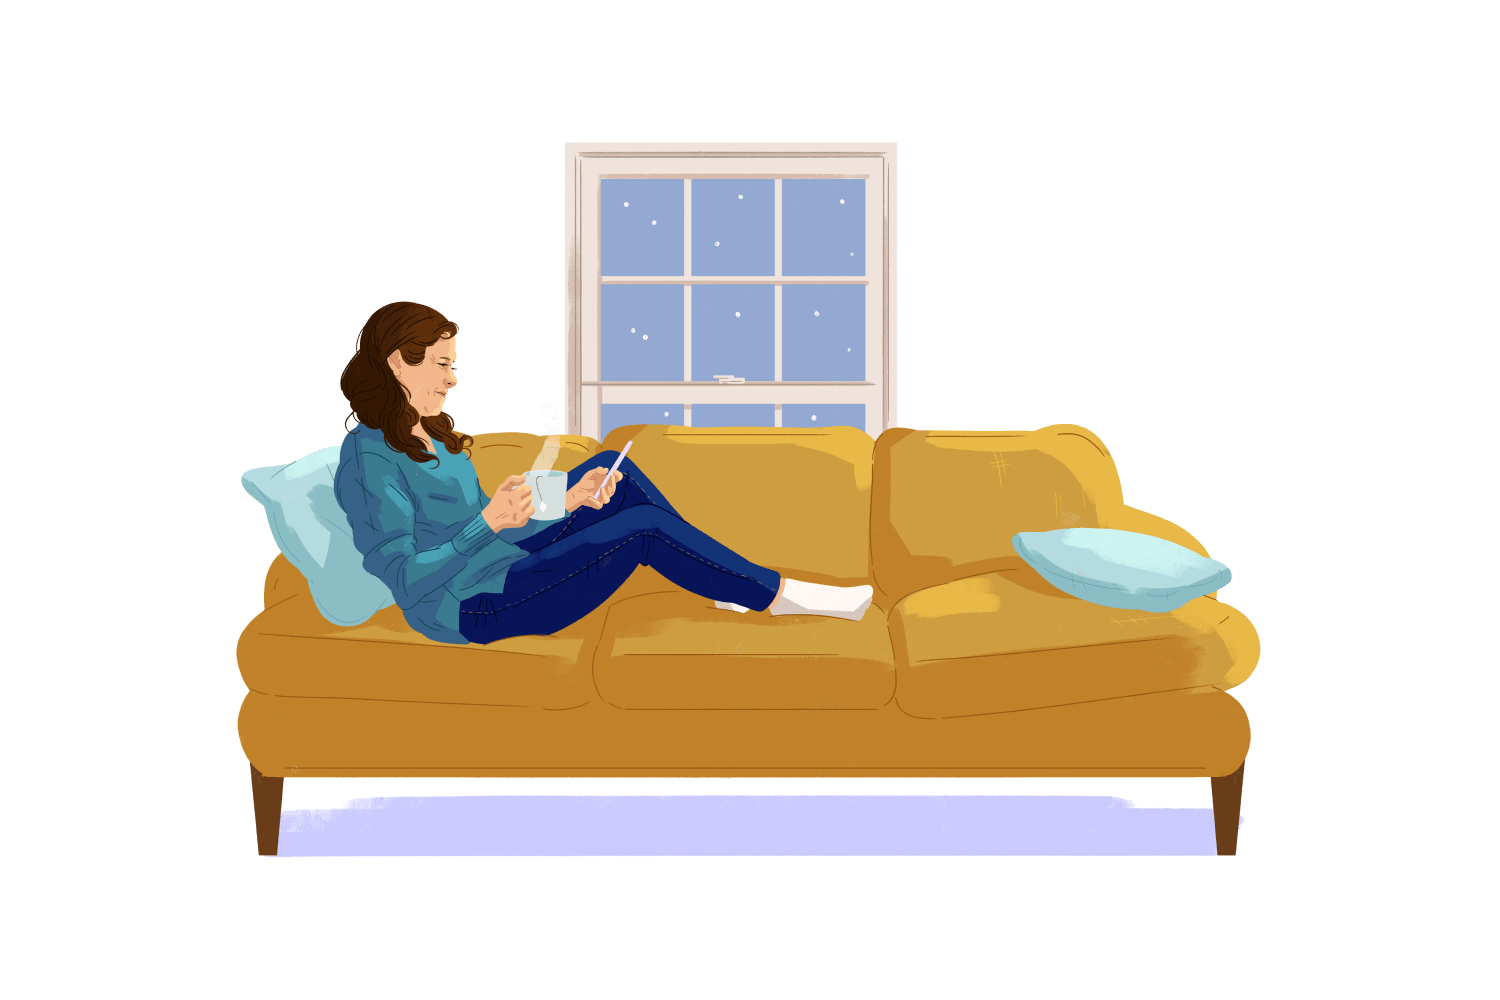 woman on couch